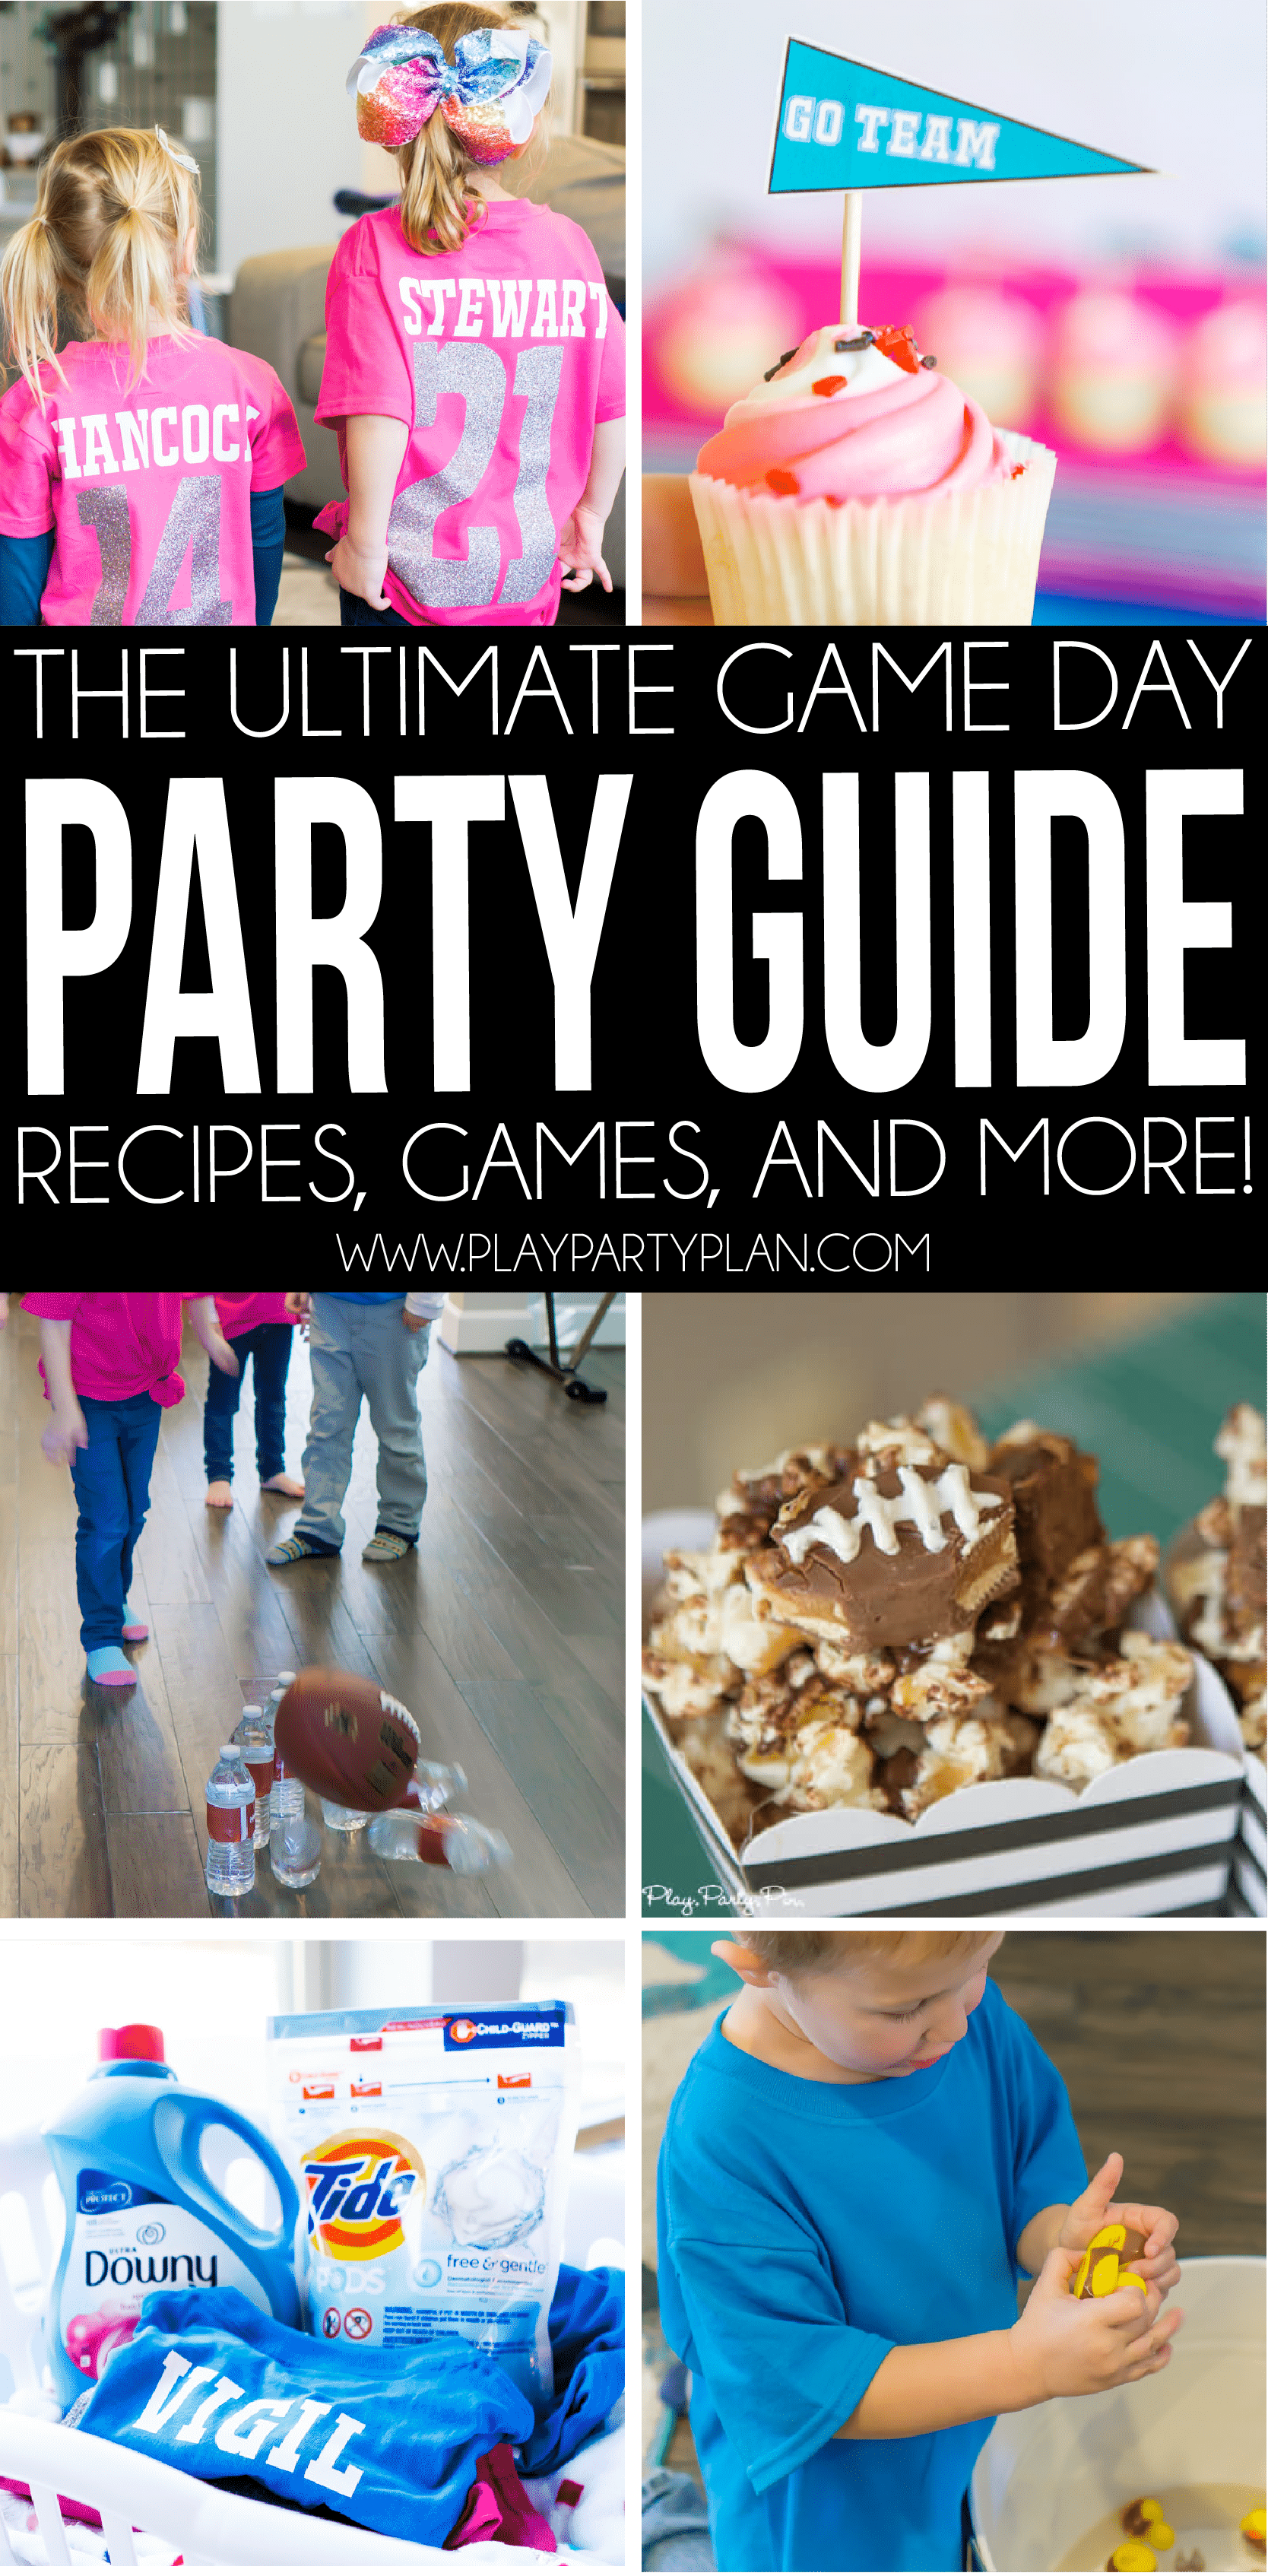 Football Party Games for Kids and Other Touchdown Worthy Party Ideas - 24